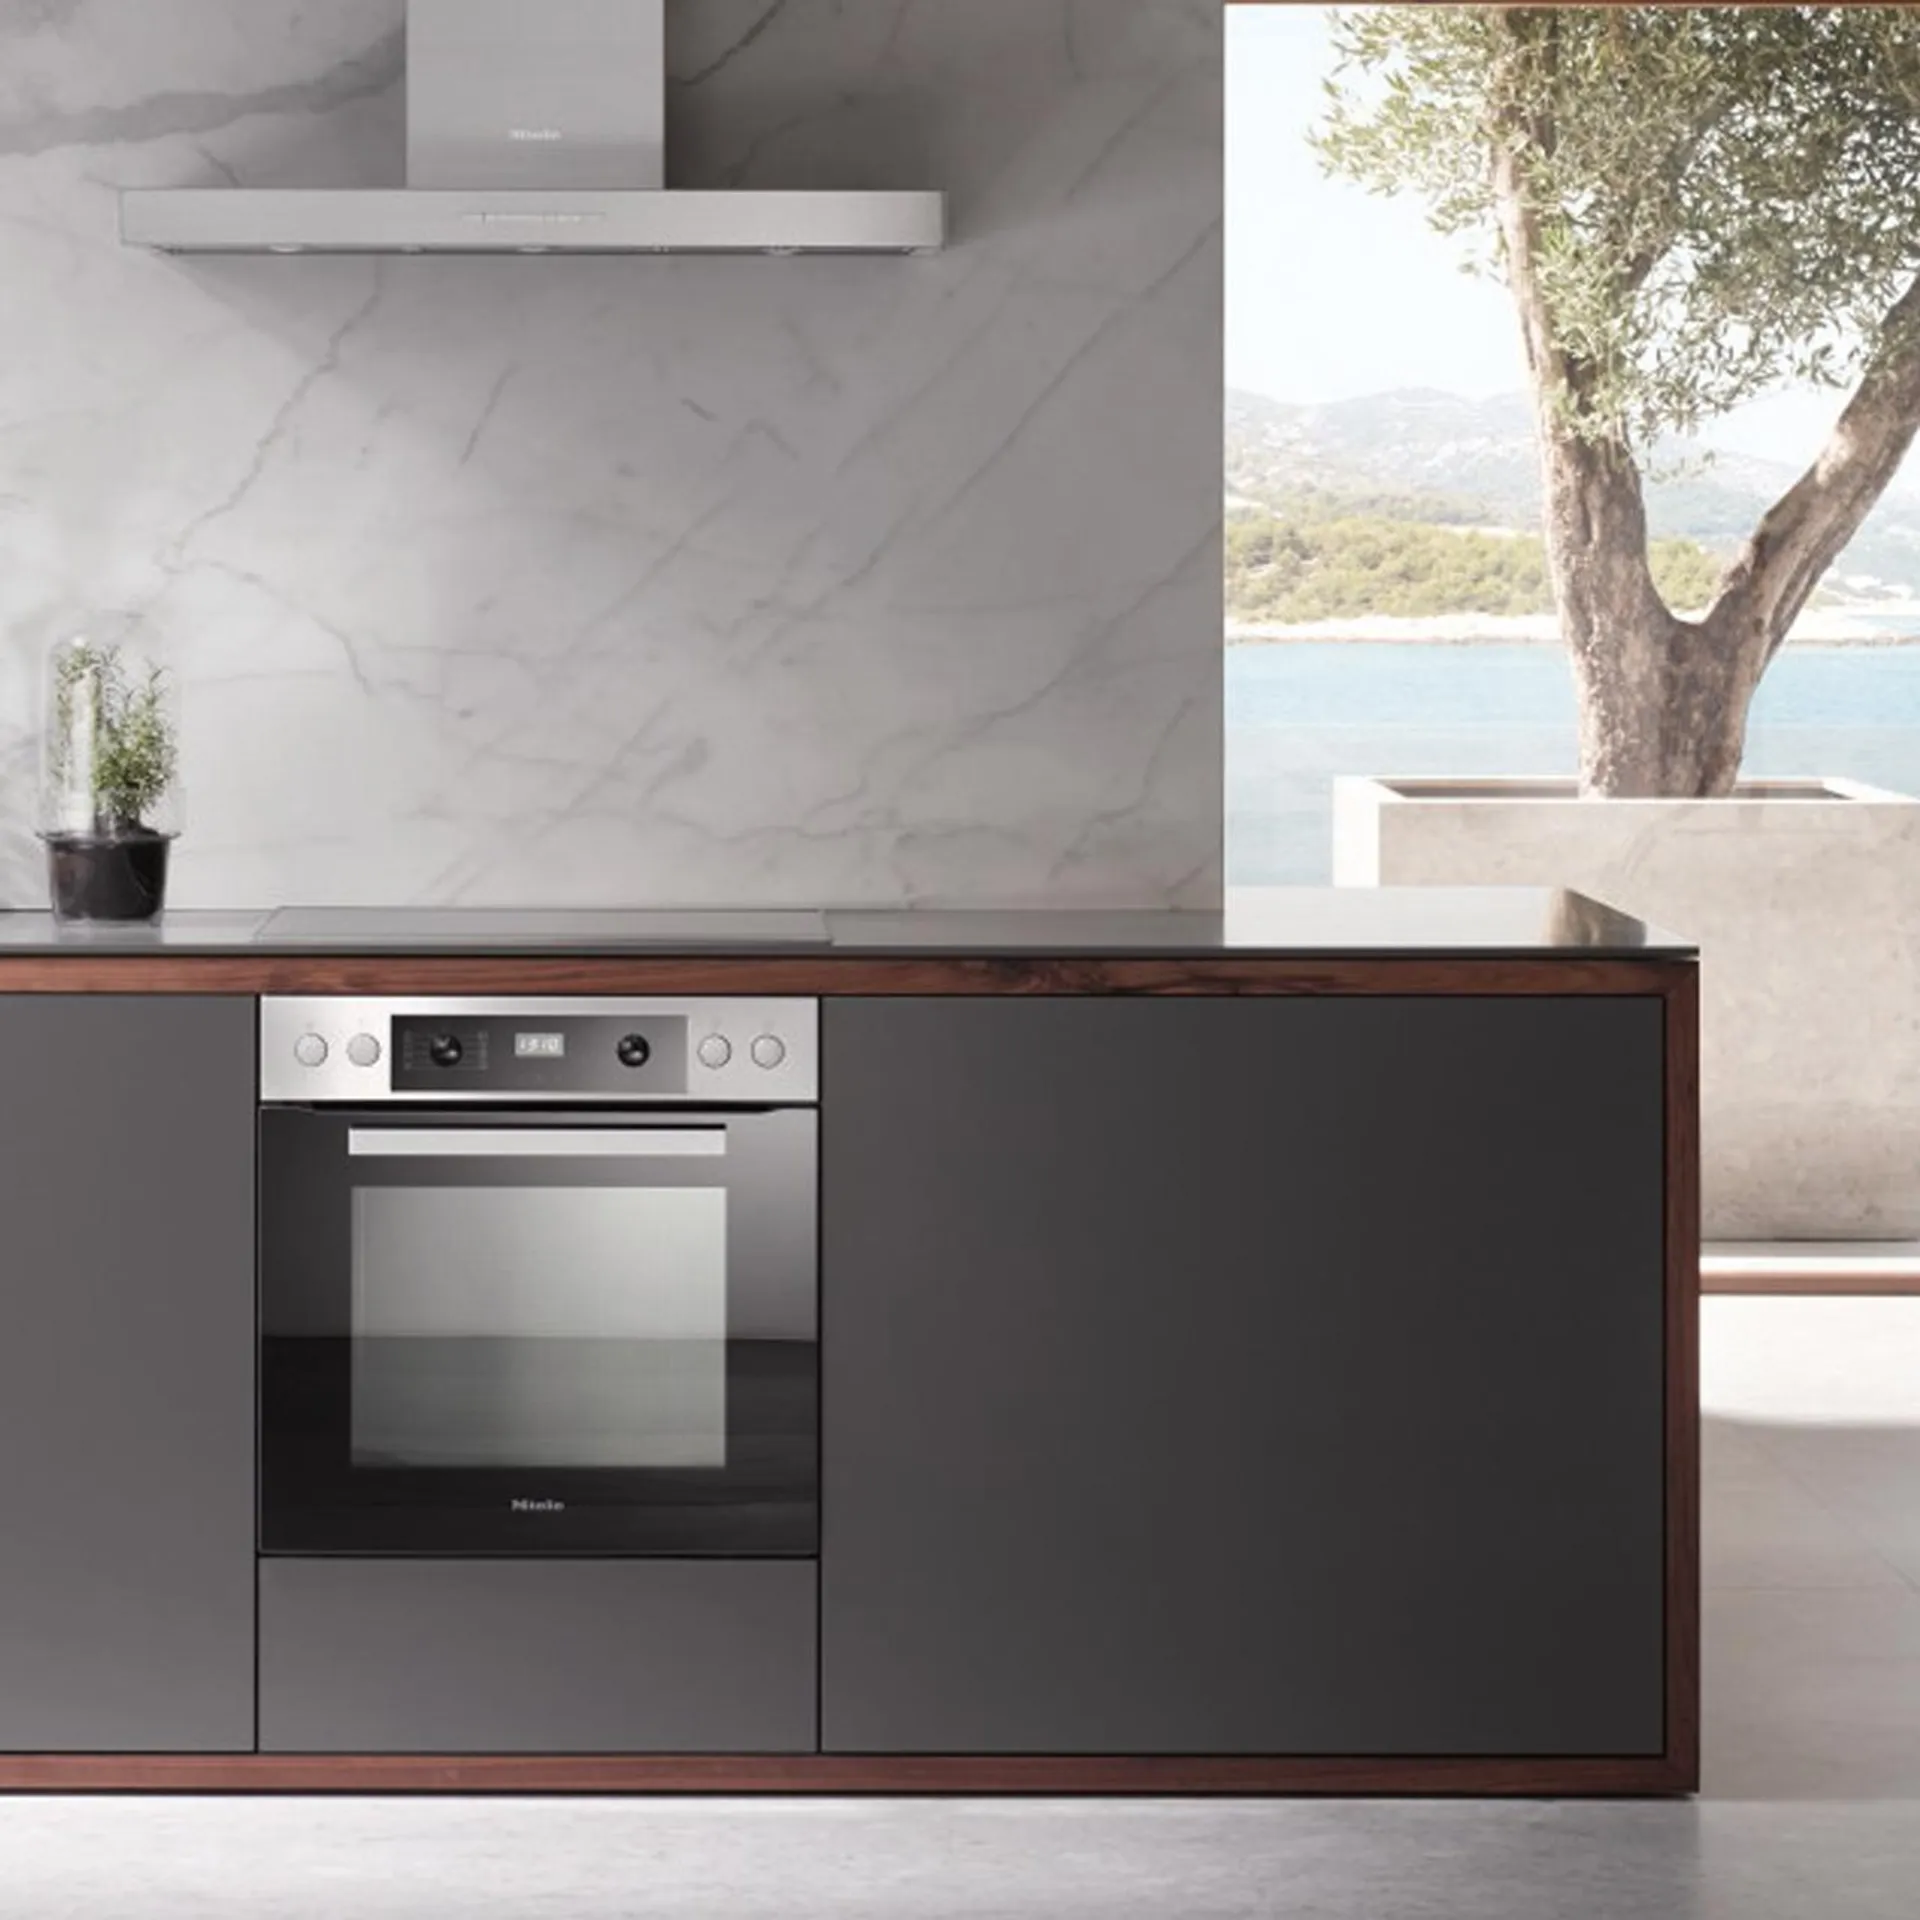 Miele H2267-1BP Built In Electric Single Oven - Clean Steel - A+ Rated